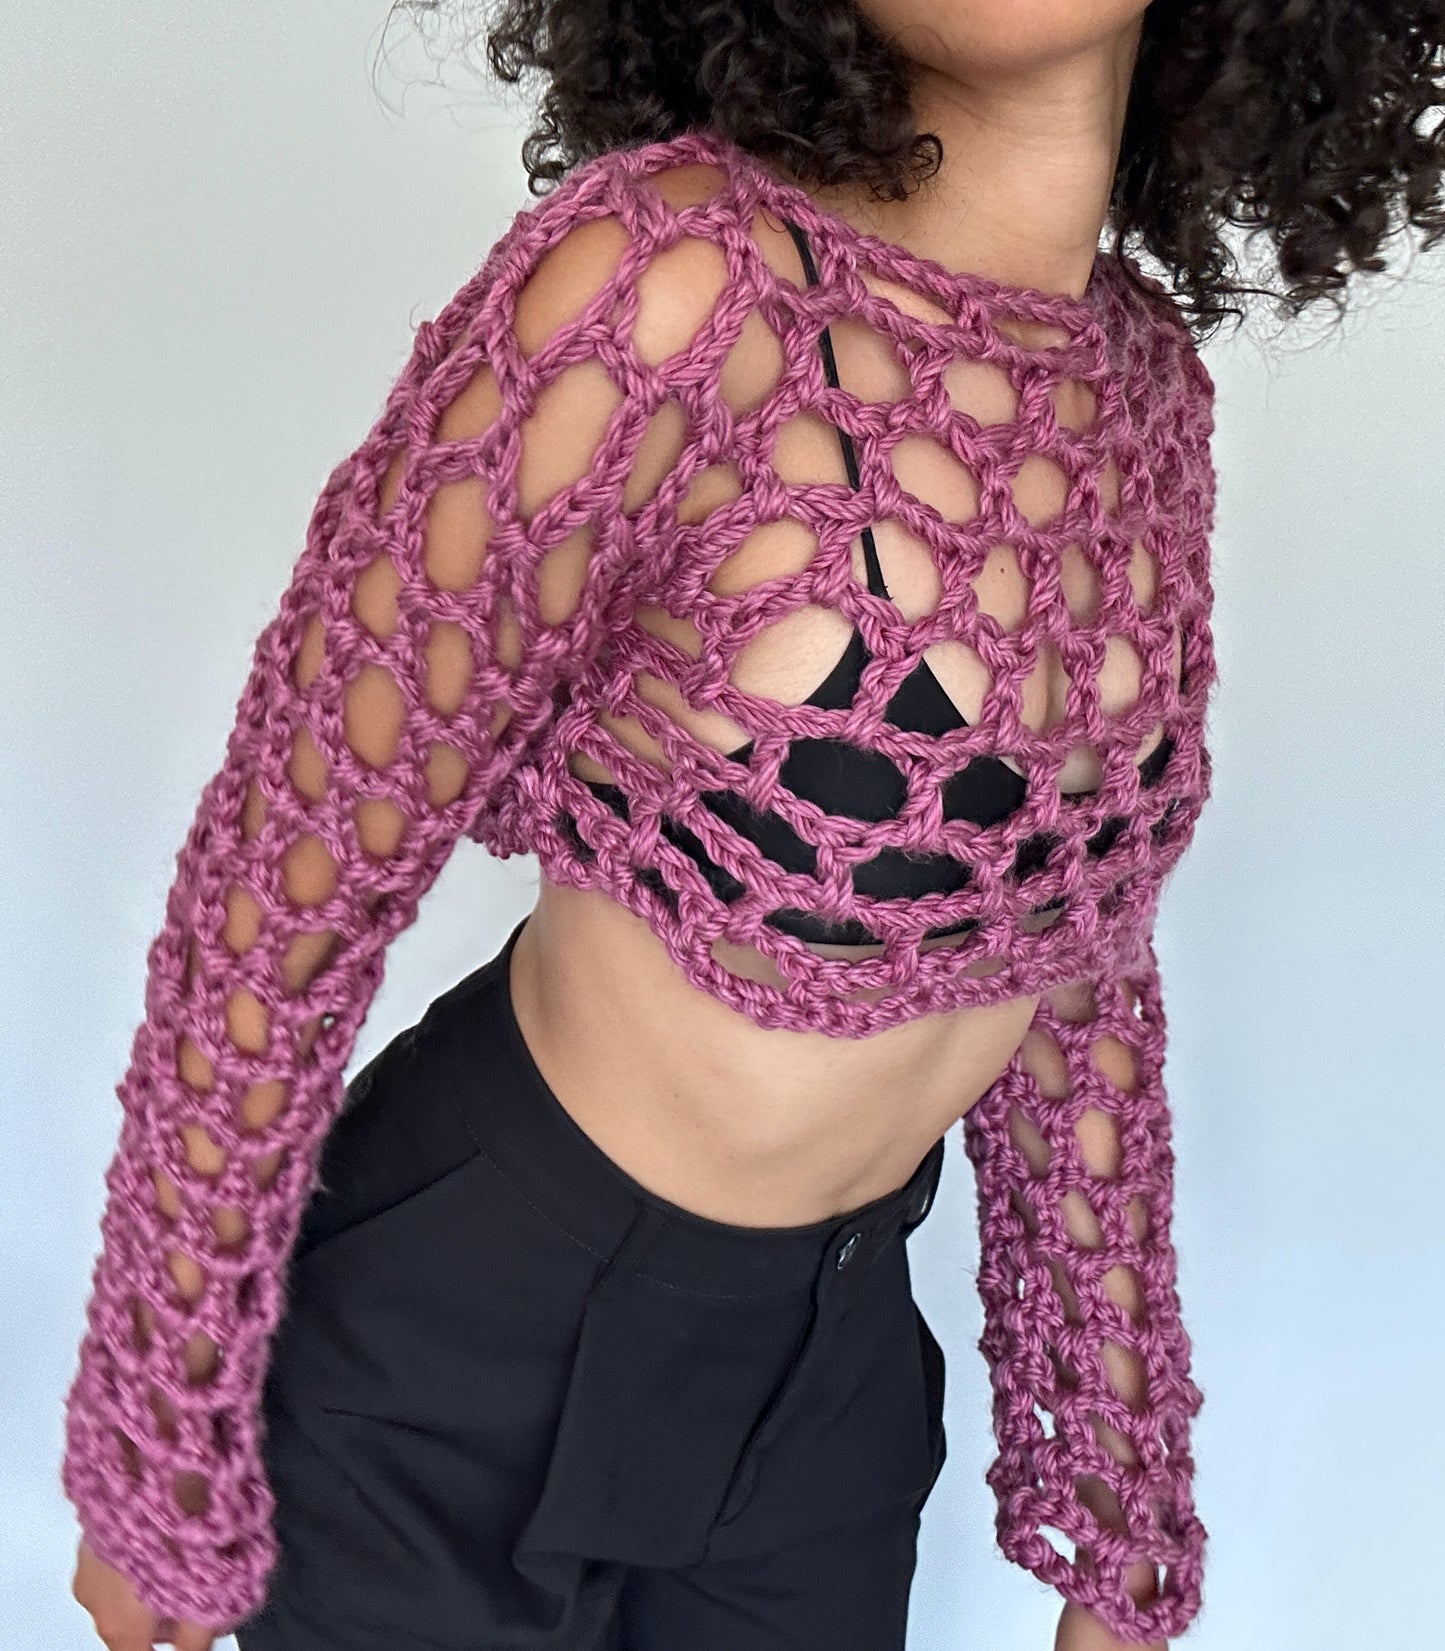 Shows a model wearing the crocheted KNOTTY Long Sleeve Crop Top, which is pink and has an open mesh design